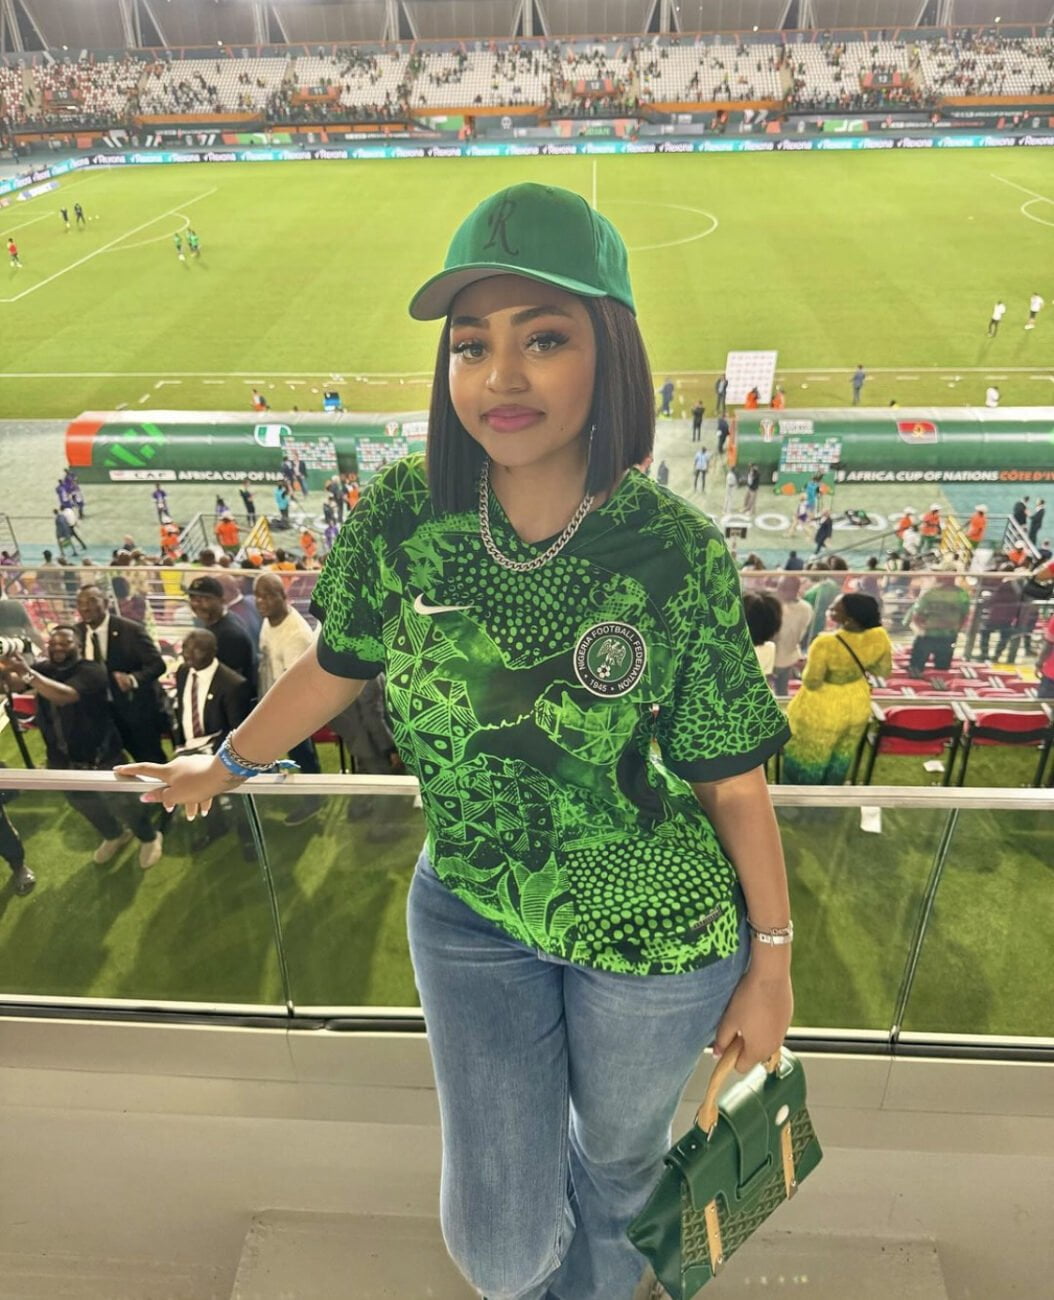 Regina Daniels pictured in a Nigerian jersey at an AFCON match.